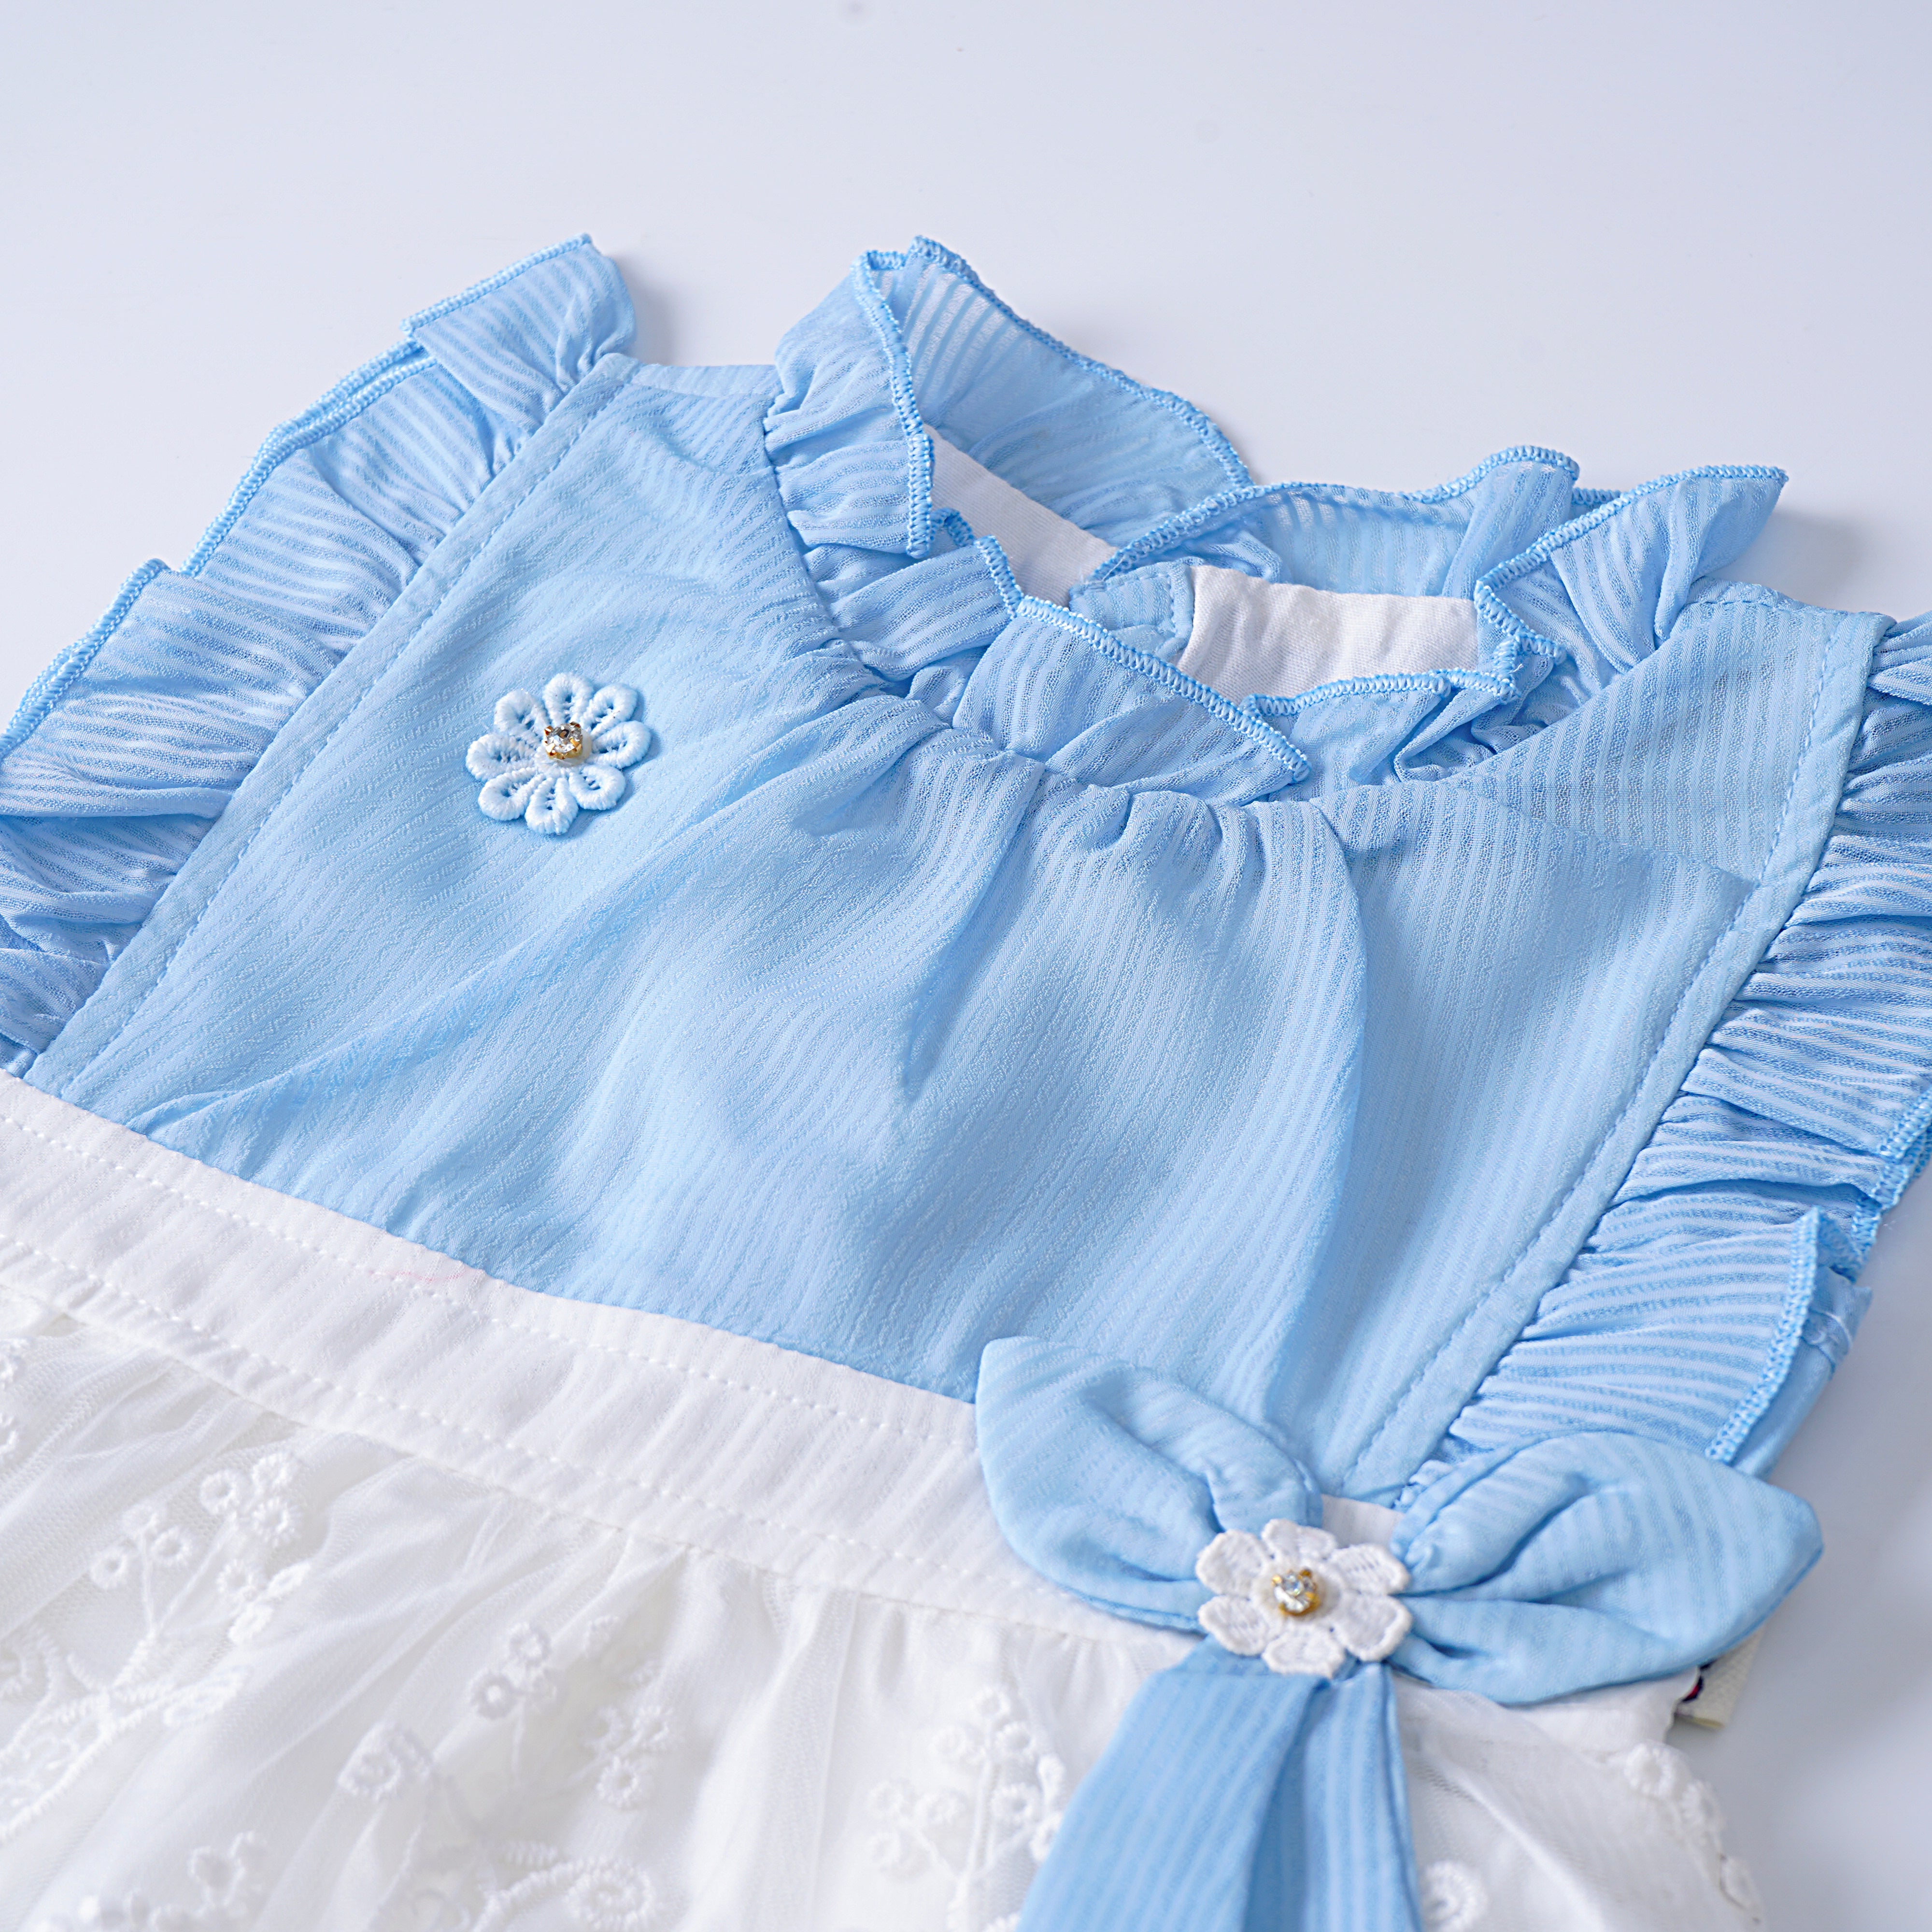 Baby Suit (1960)